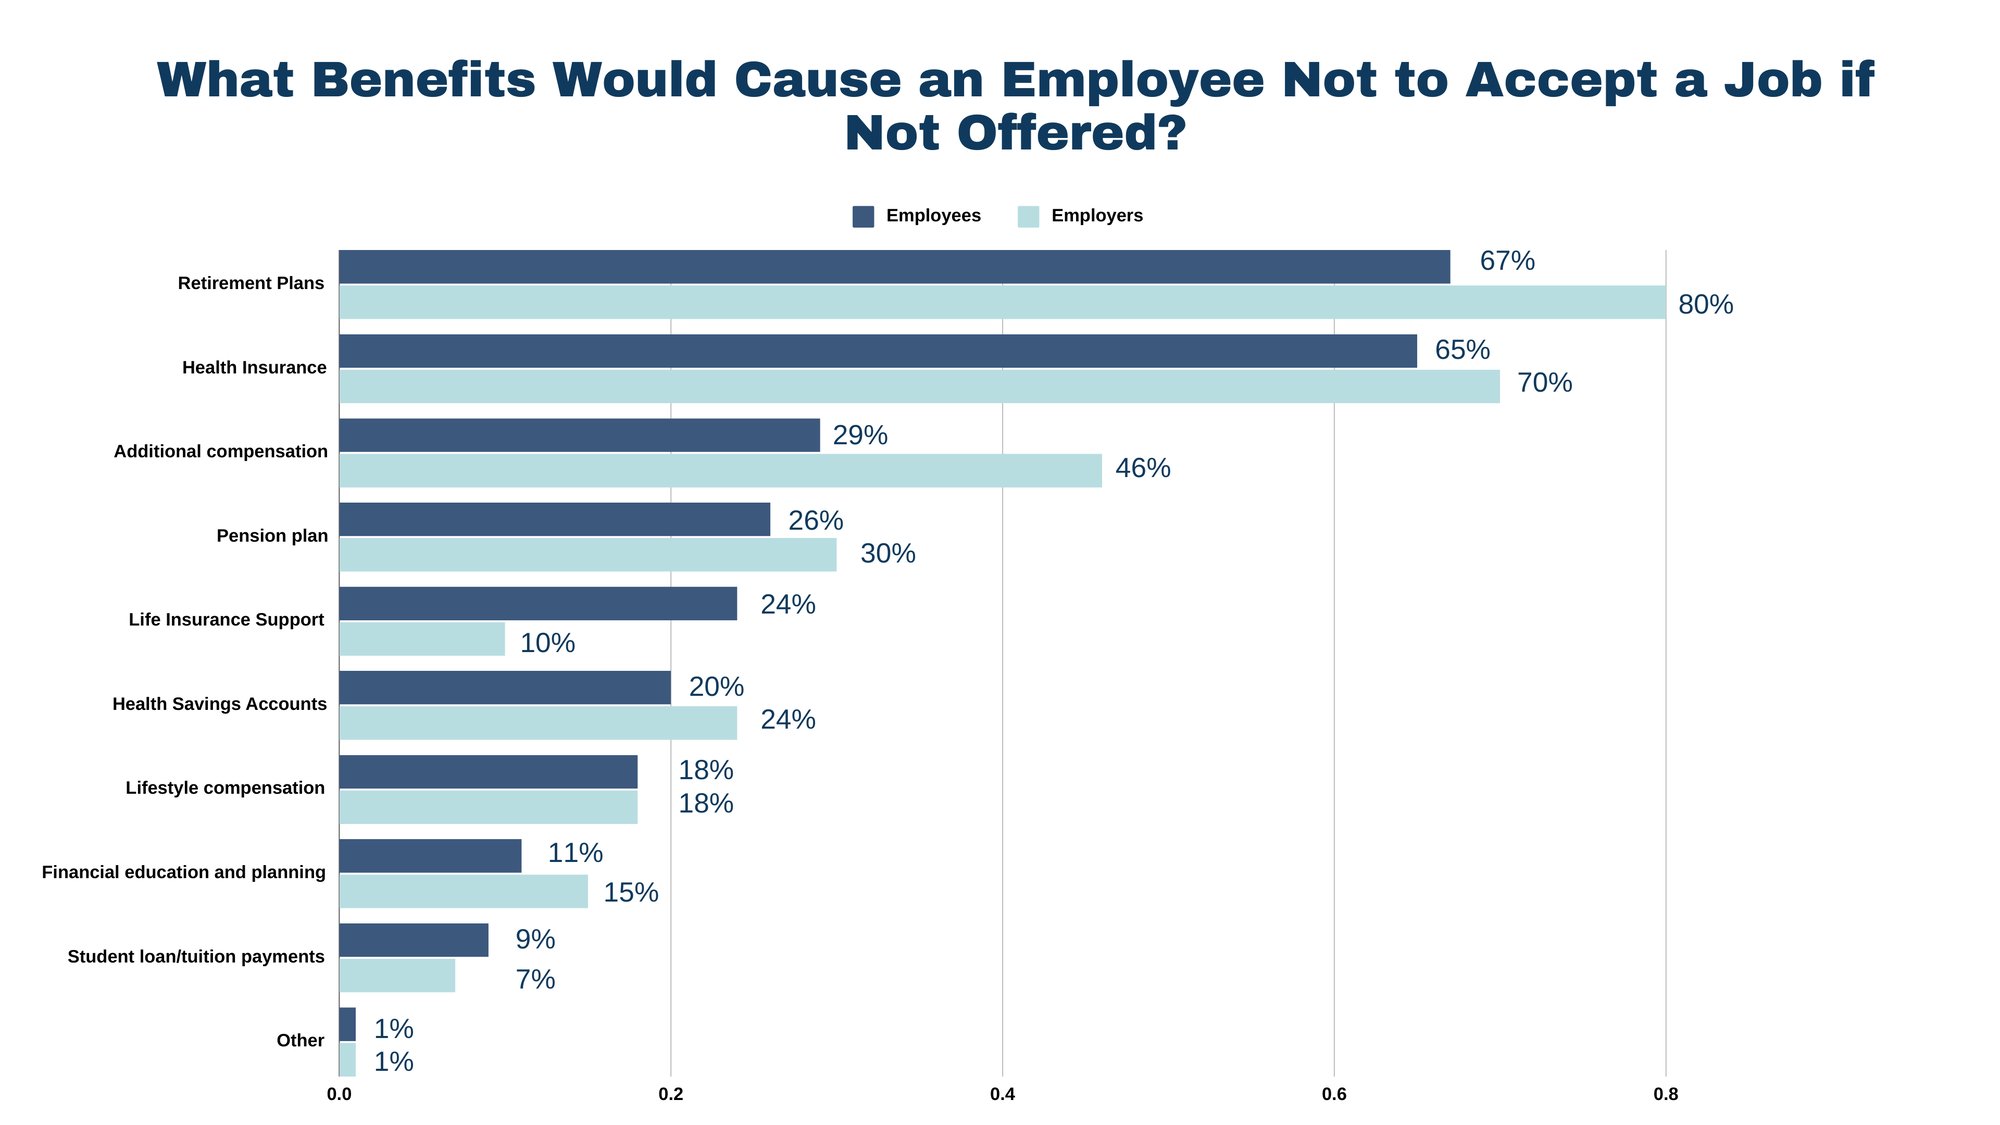 What Benefits Would Cause an Employee Not to Accept a Job if Not Offered?